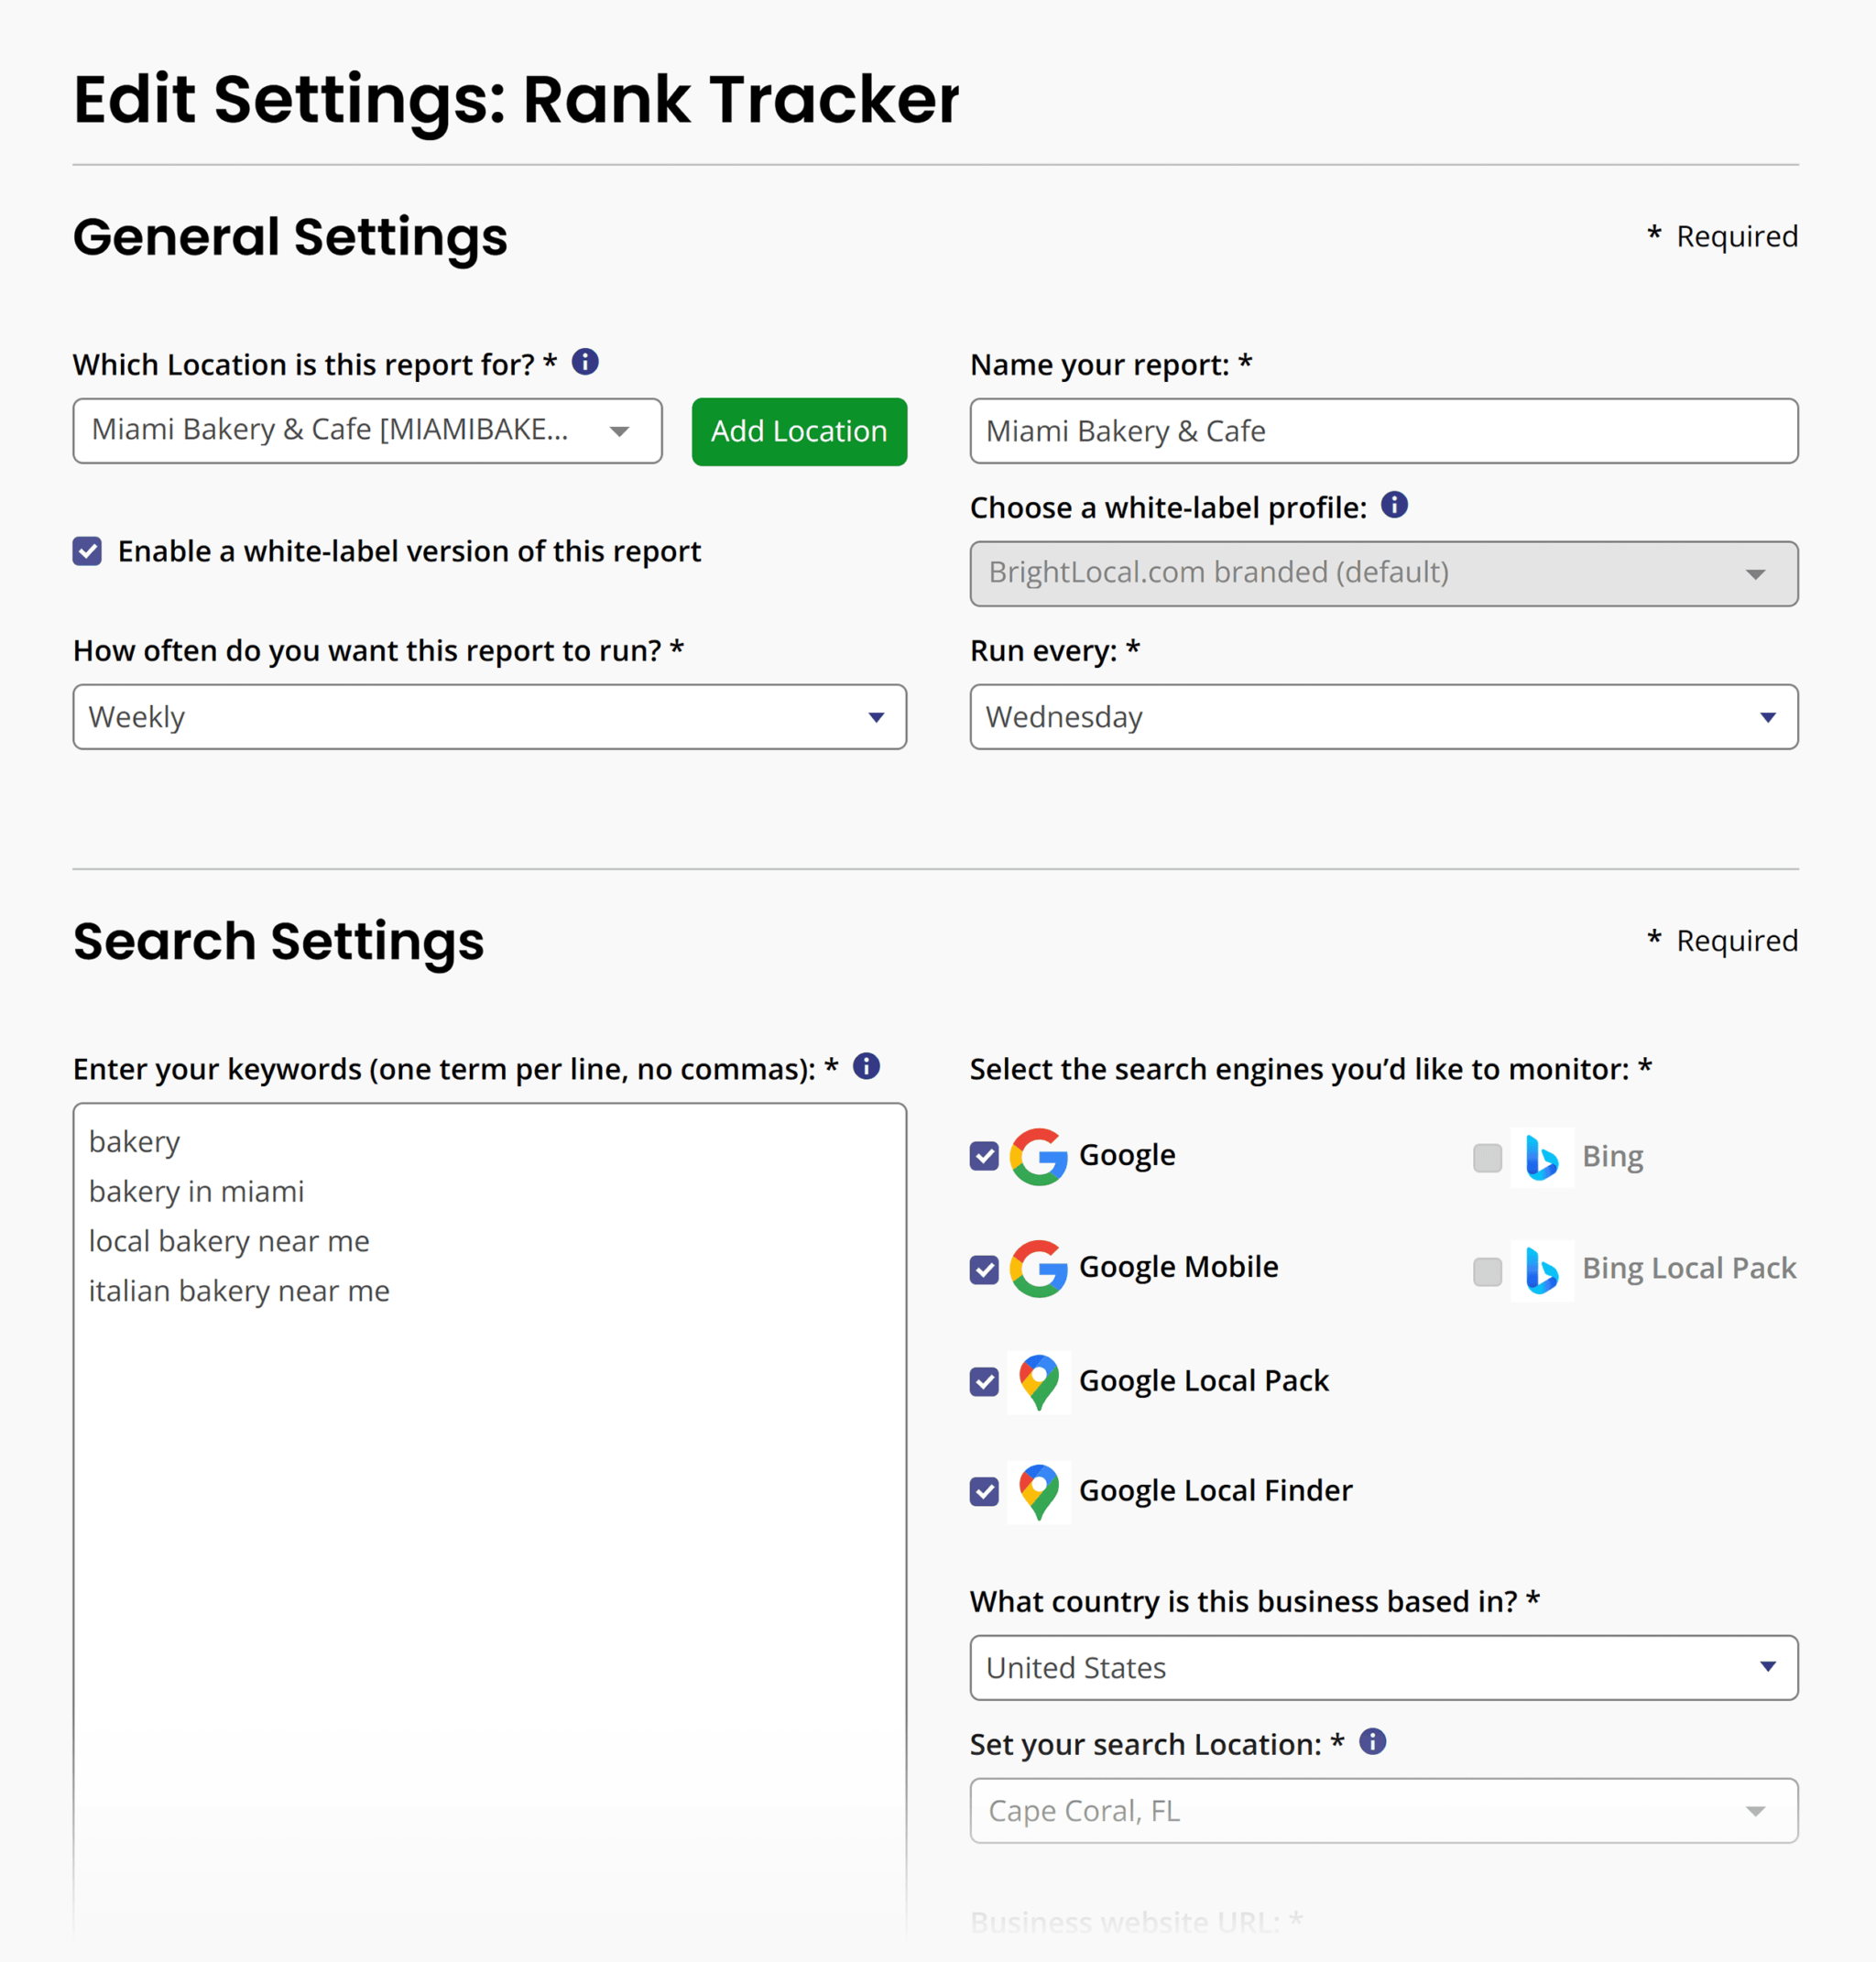 brightlocal-rank-tracker-settings Top 5 Local Rank Tracker Tools (Tested & Reviewed)